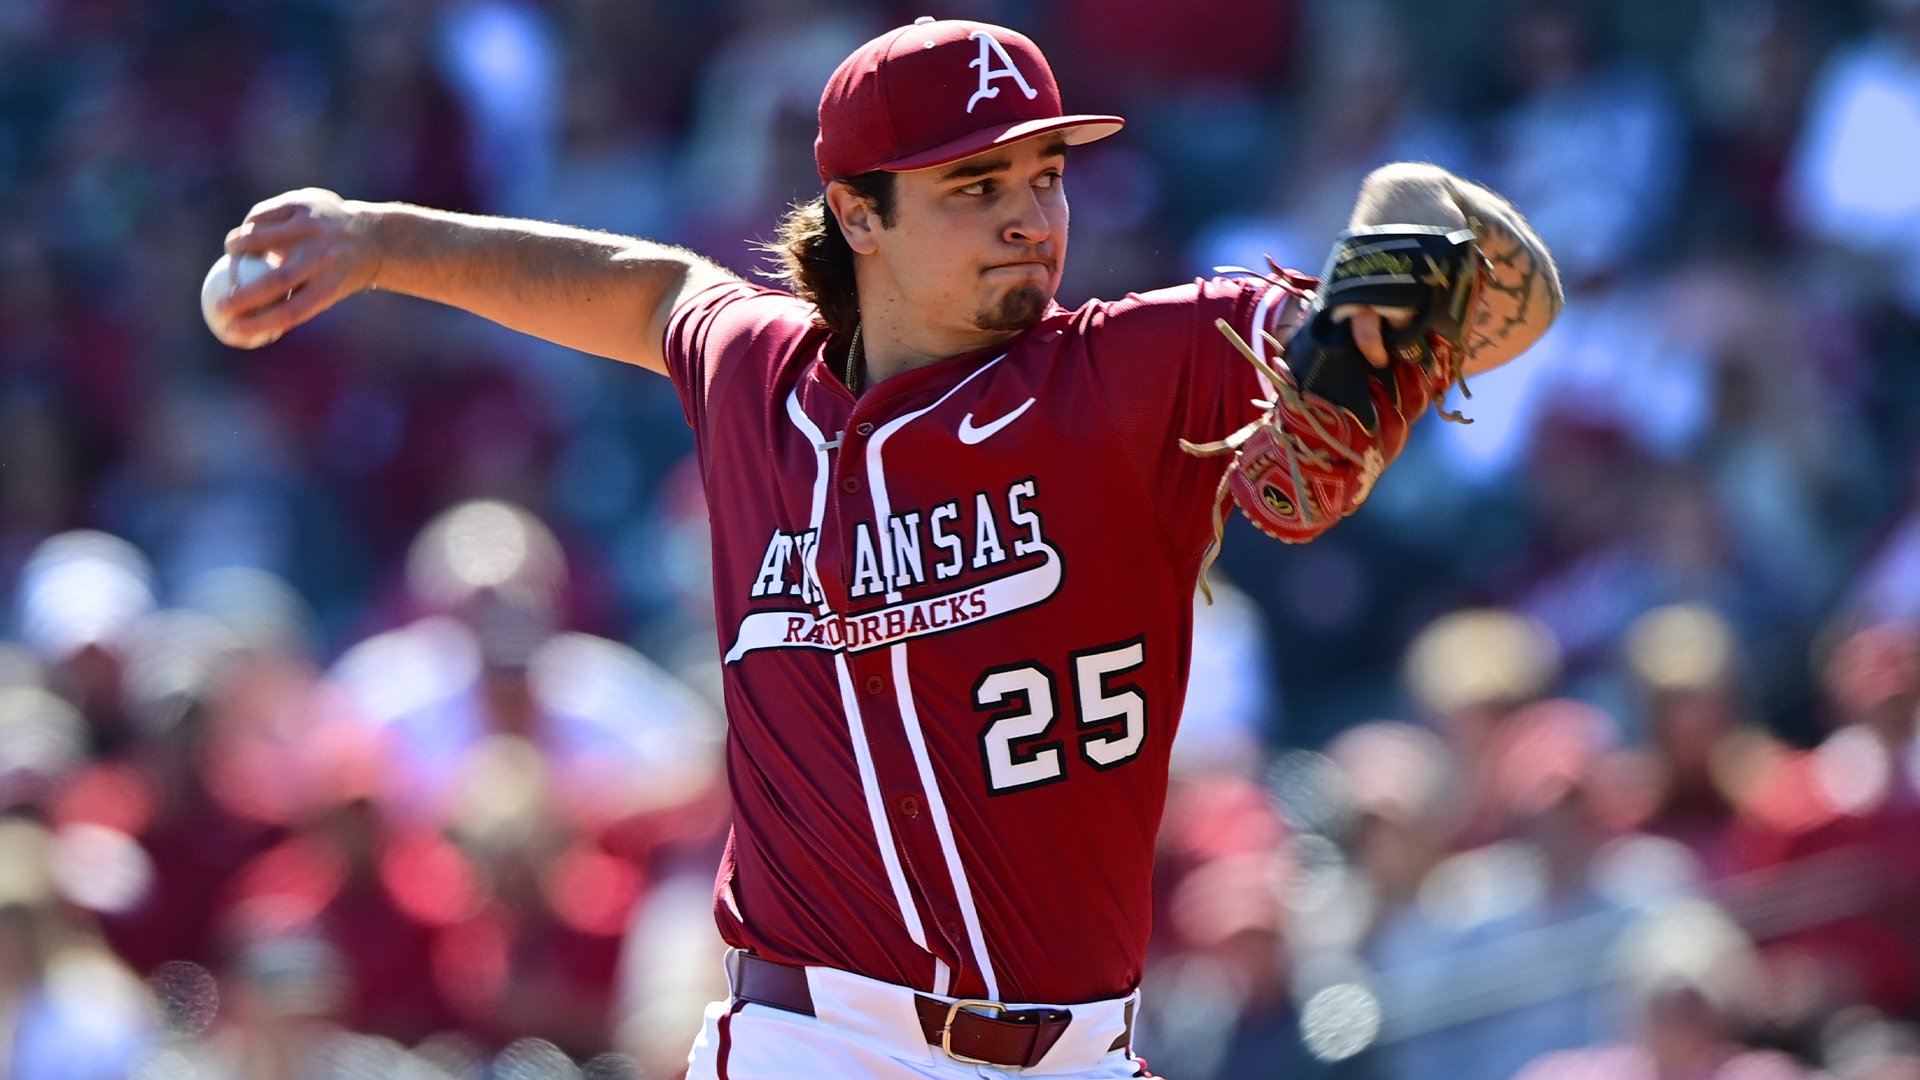 Tygart’s 10 Strikeouts, Diggs’ Dinger Power #2 Arkansas to Series Win